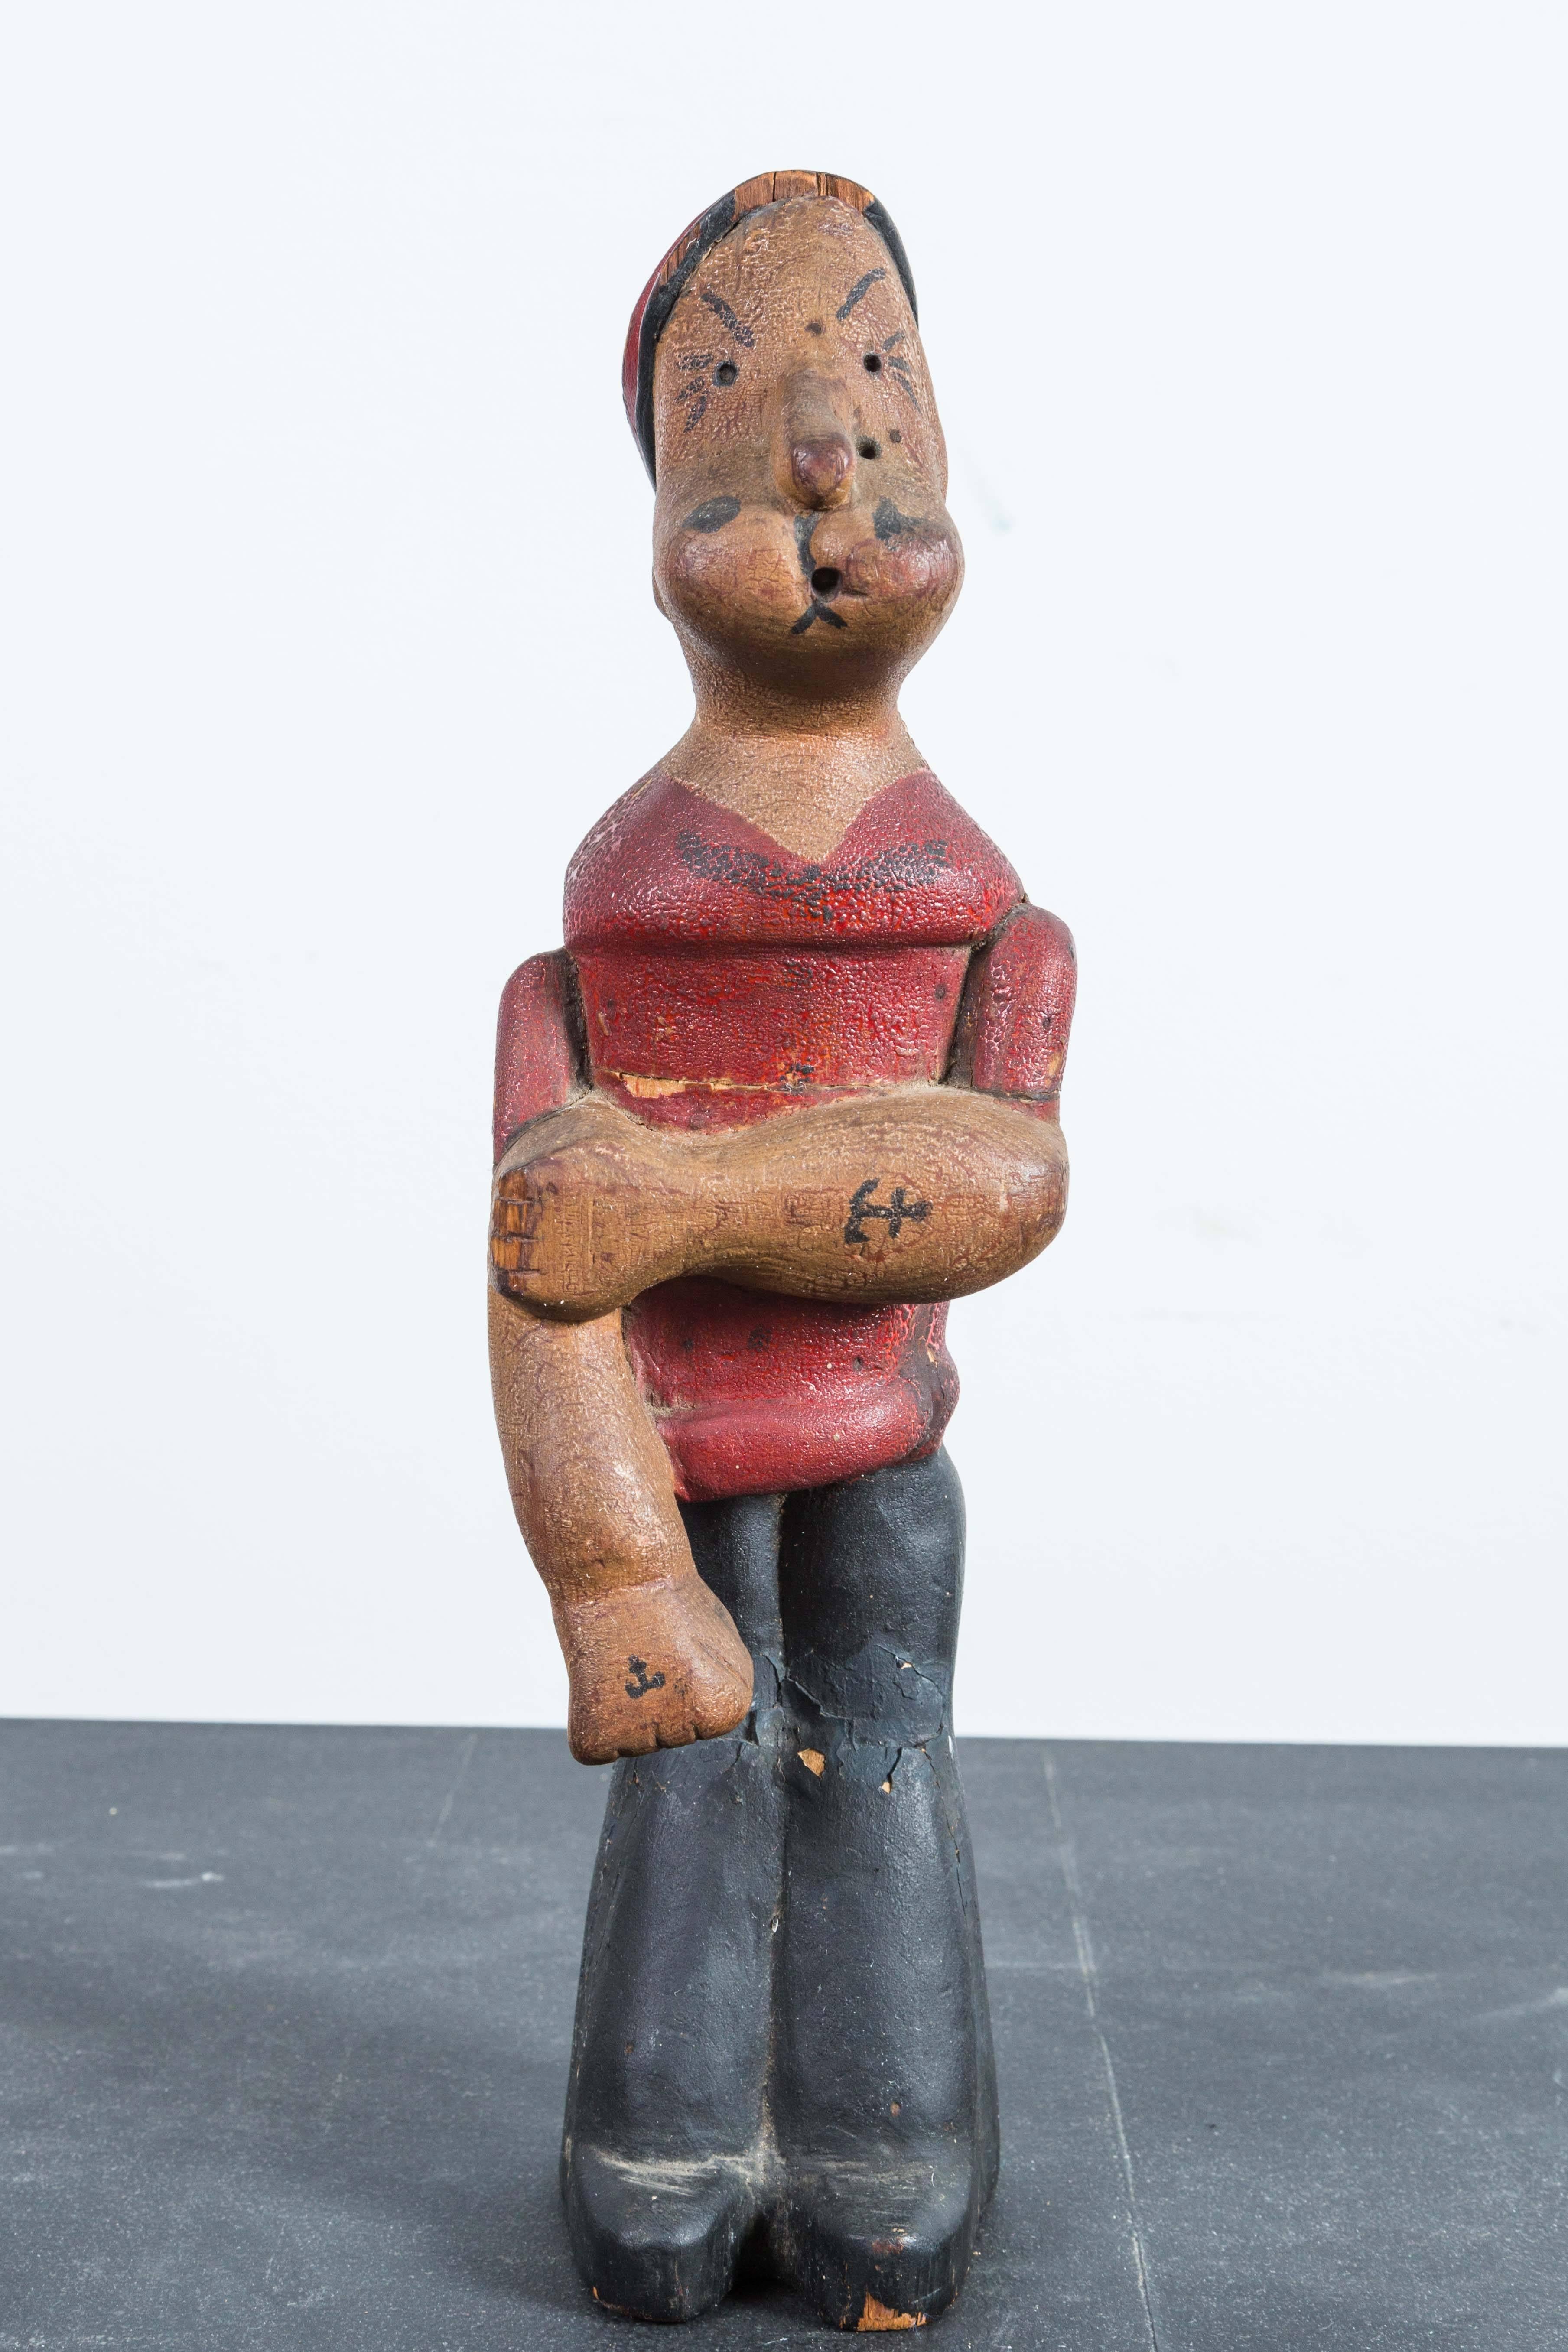 Vintage popeye figure. Hand-carved wood with amazing alligatored paint surface complete with anchor forearm tattoos. Created from three pieces of carved wood.